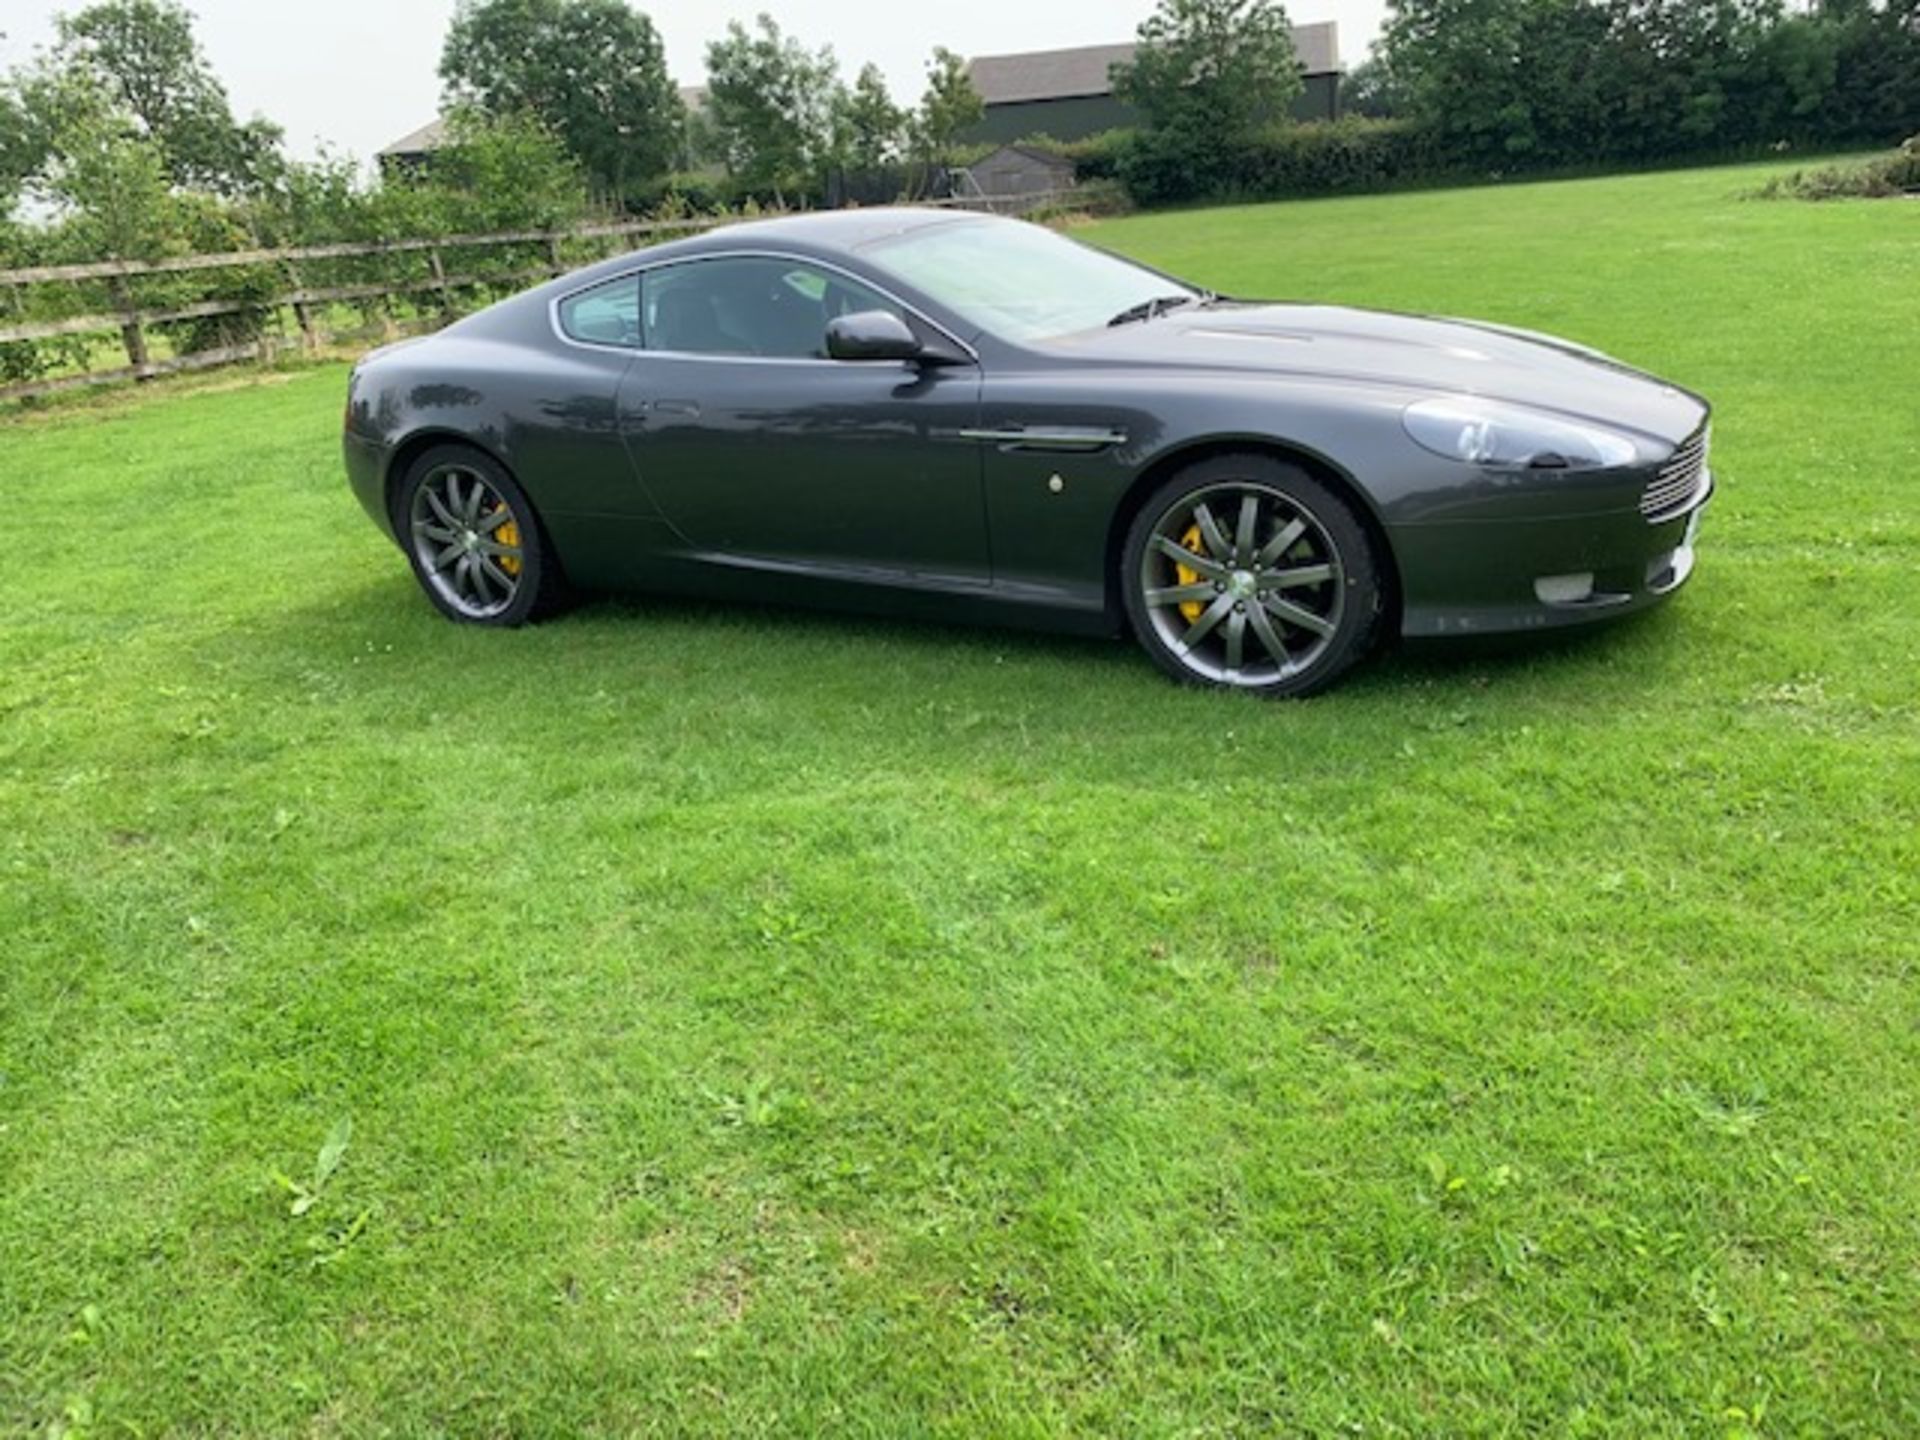 ASTON MARTIN DB9 COUPE V12 2DR TOUCHTRONIC AUTO (5935 cc) - Image 8 of 13